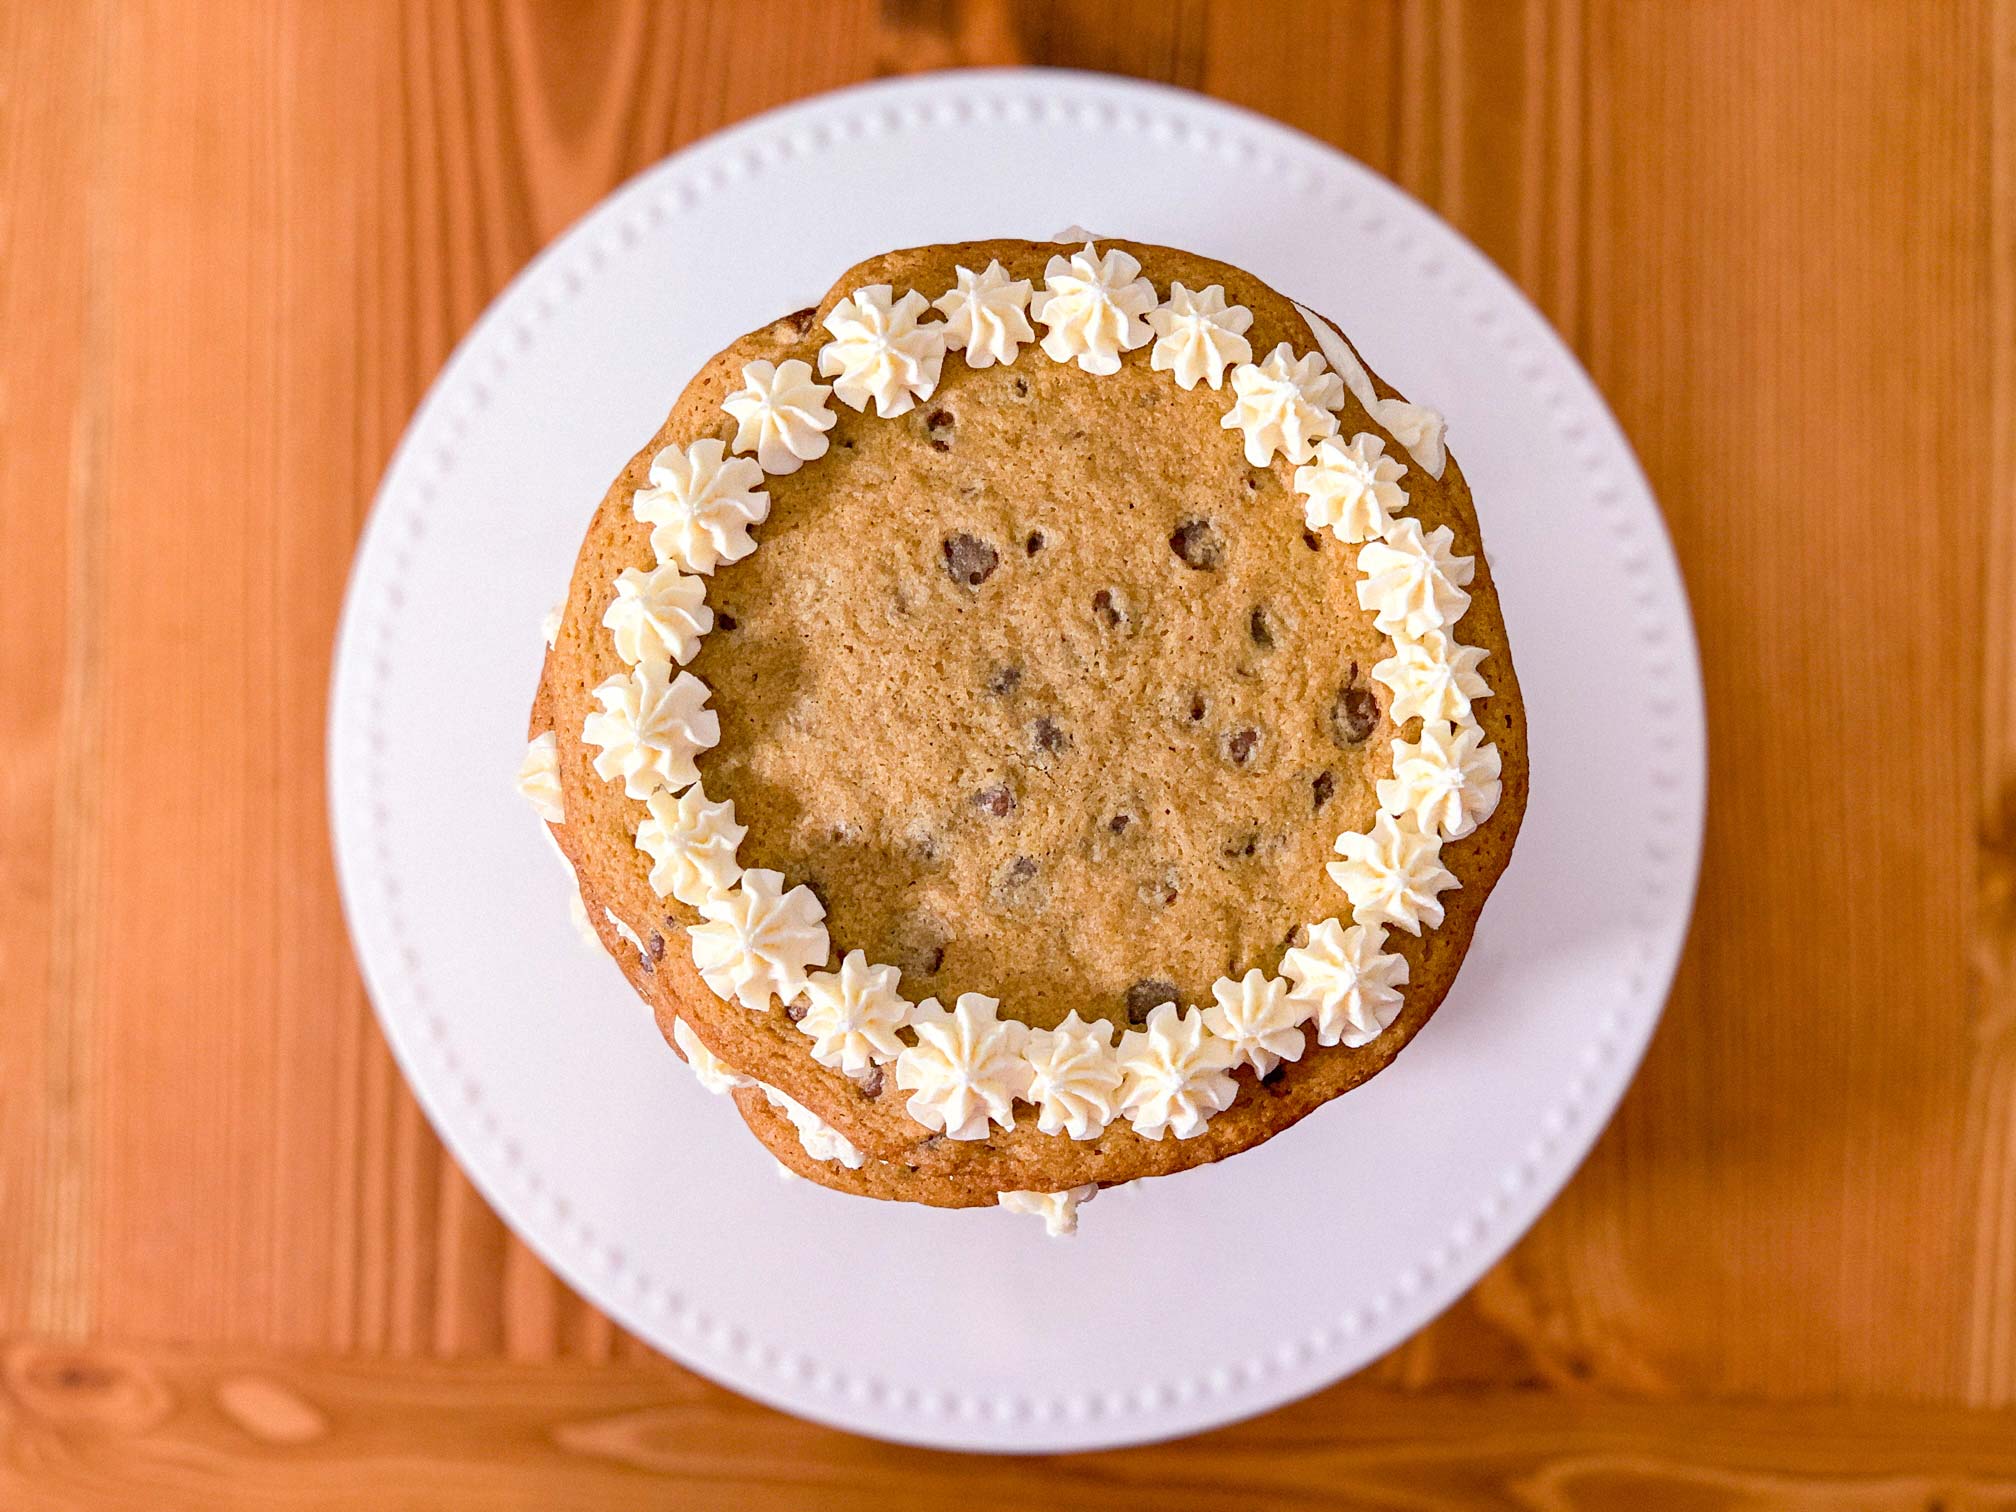 a birds eye view of the fully assembled chocolate chip cookie cake